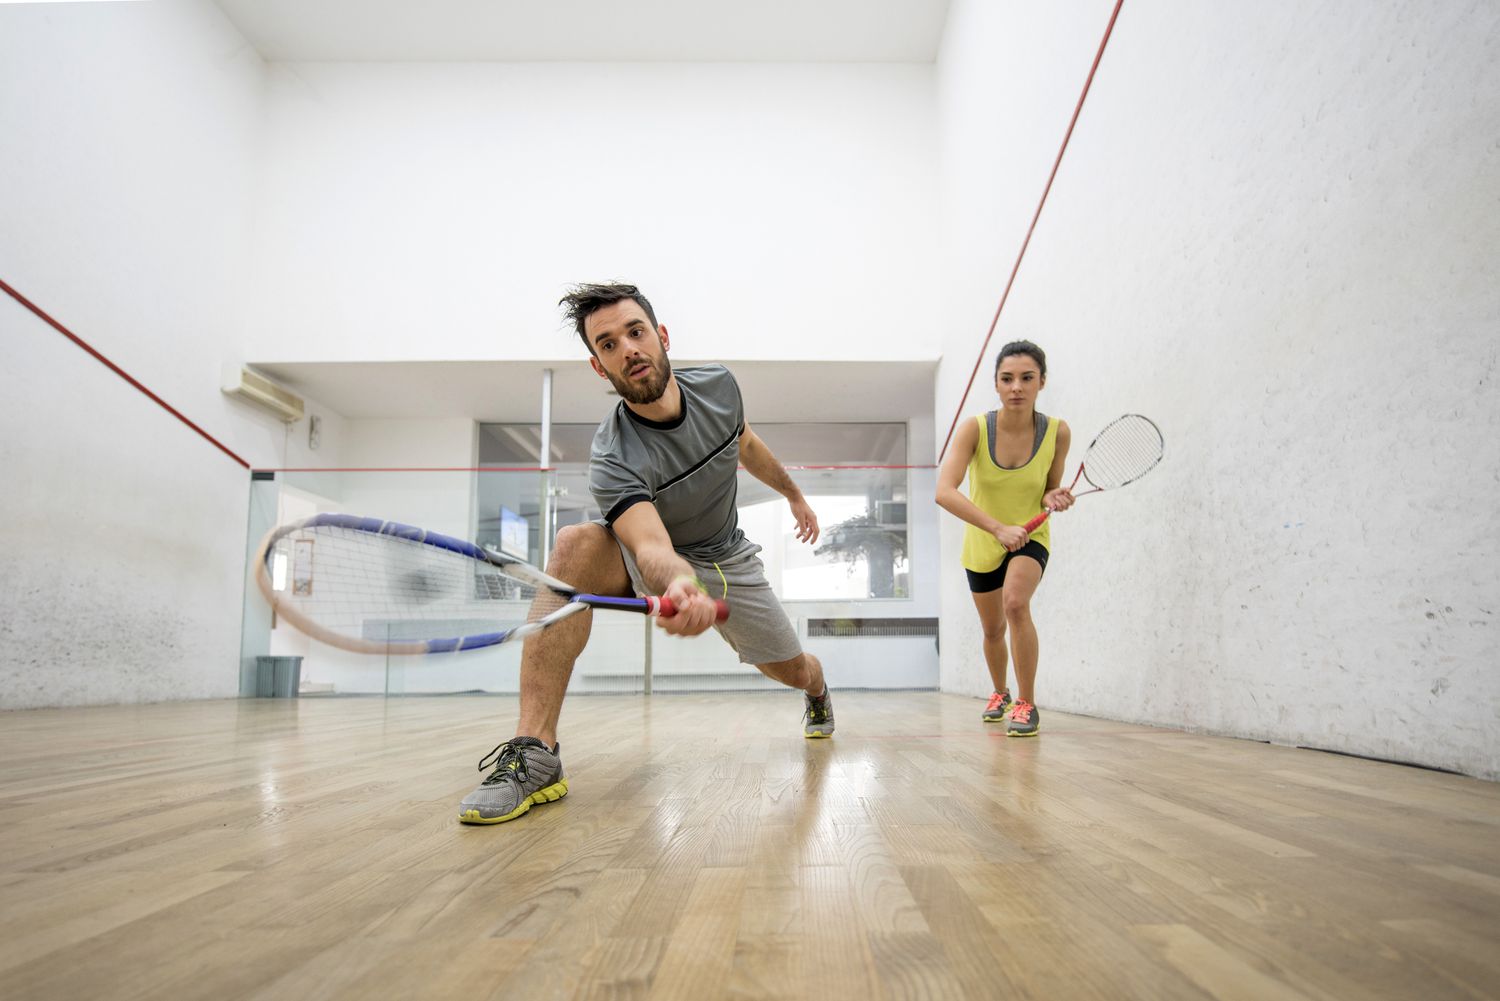 Below view of young man and woman playing squash